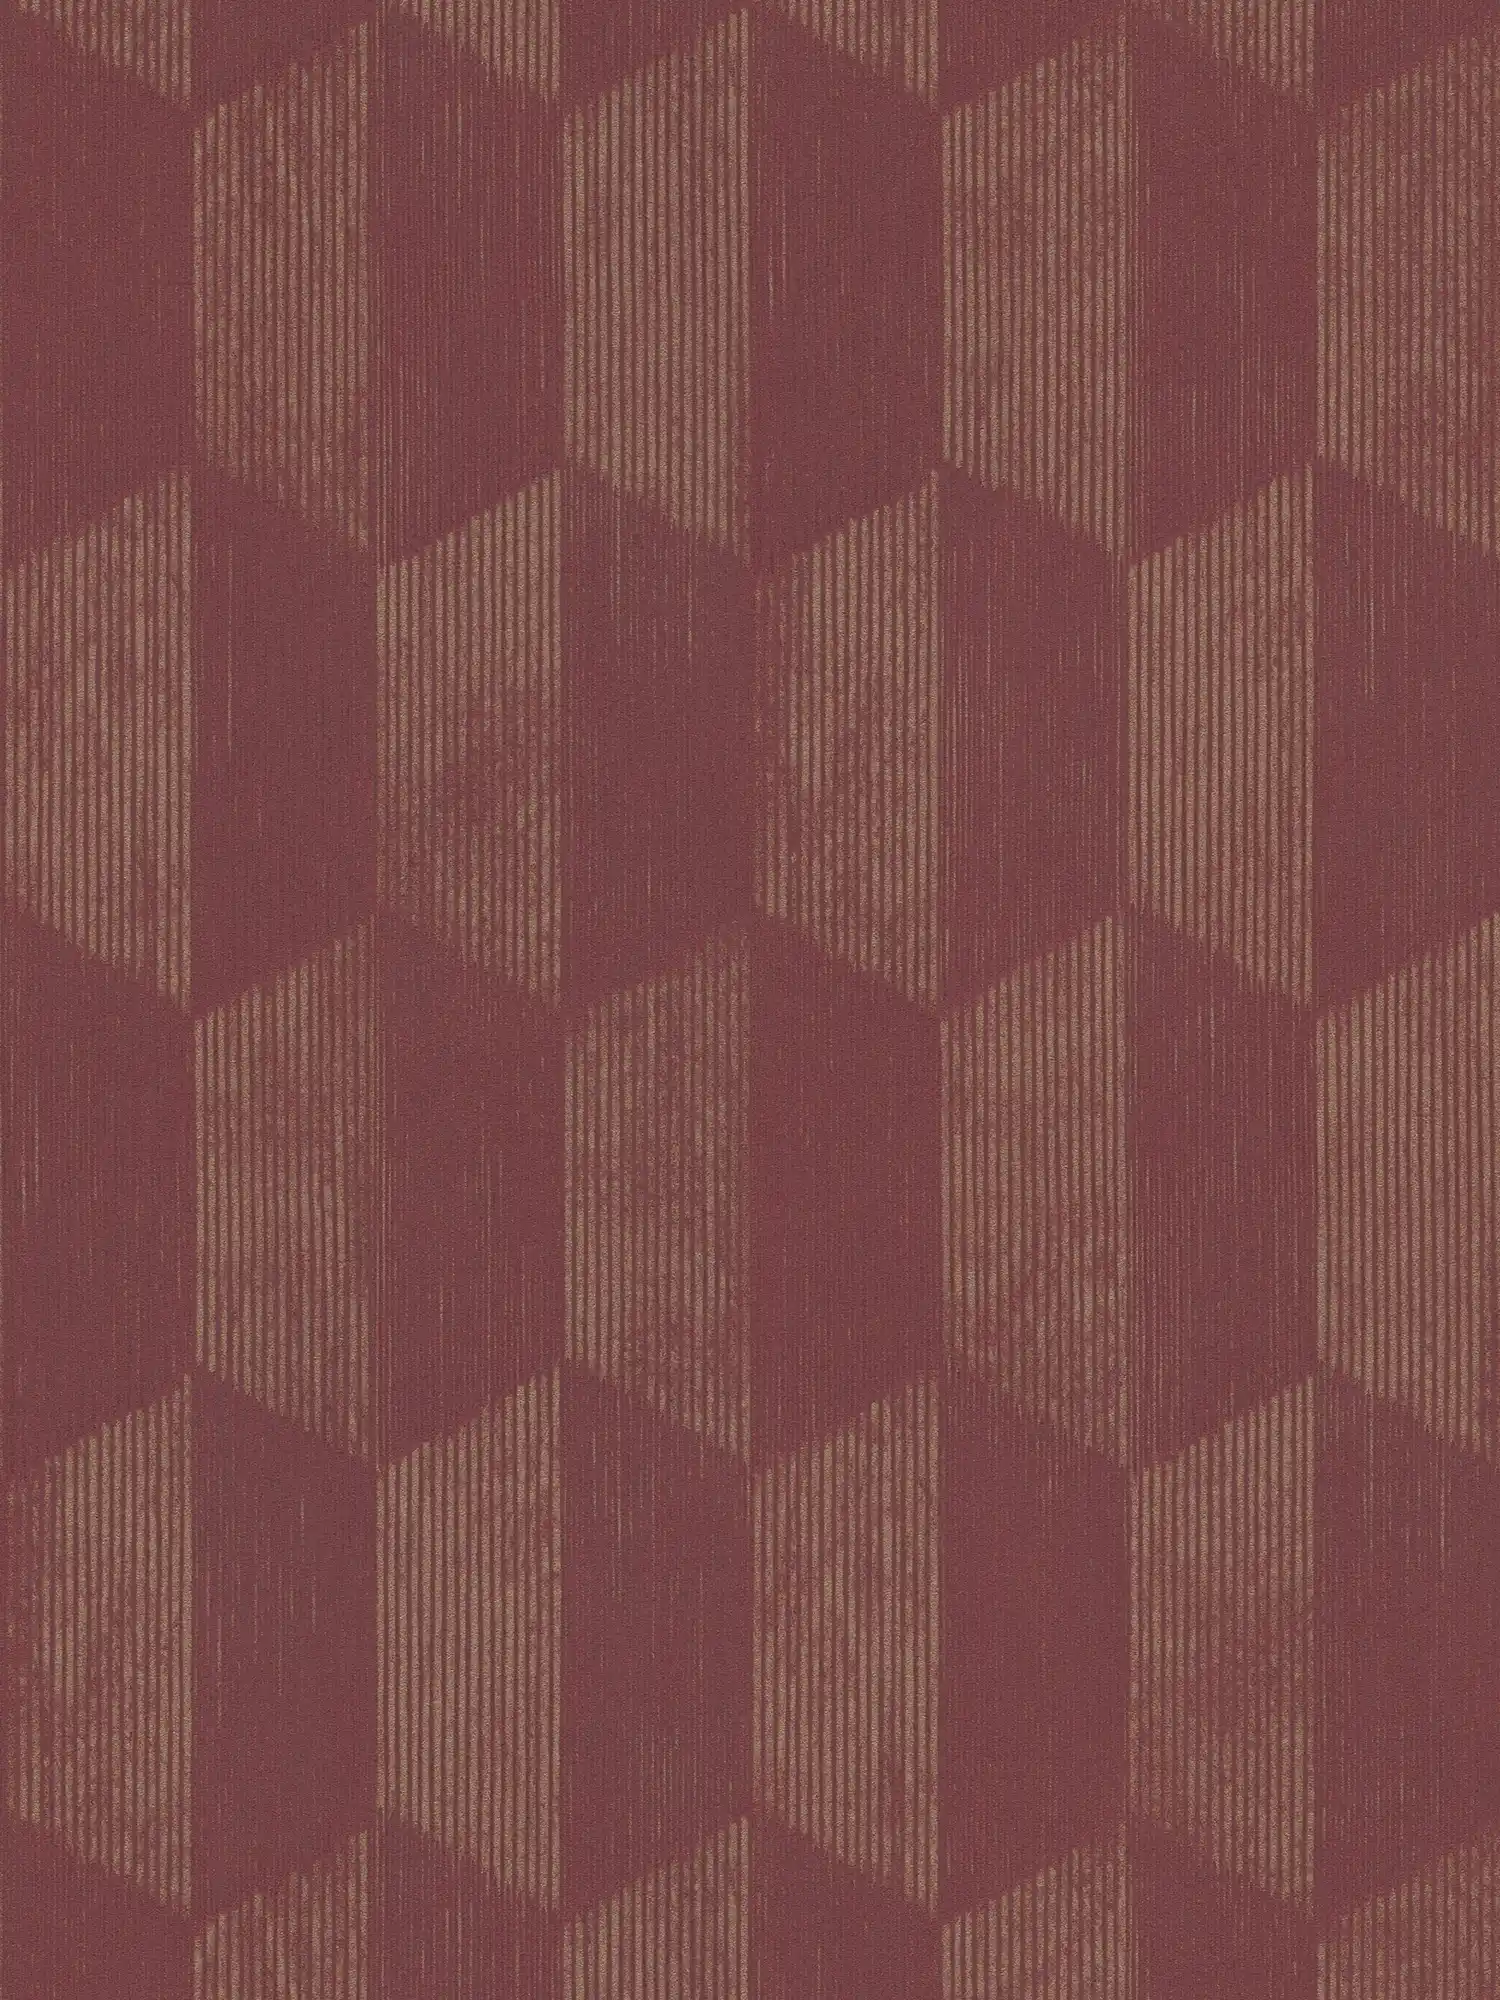 Textured wallpaper with 3D graphic pattern - metallic, red
